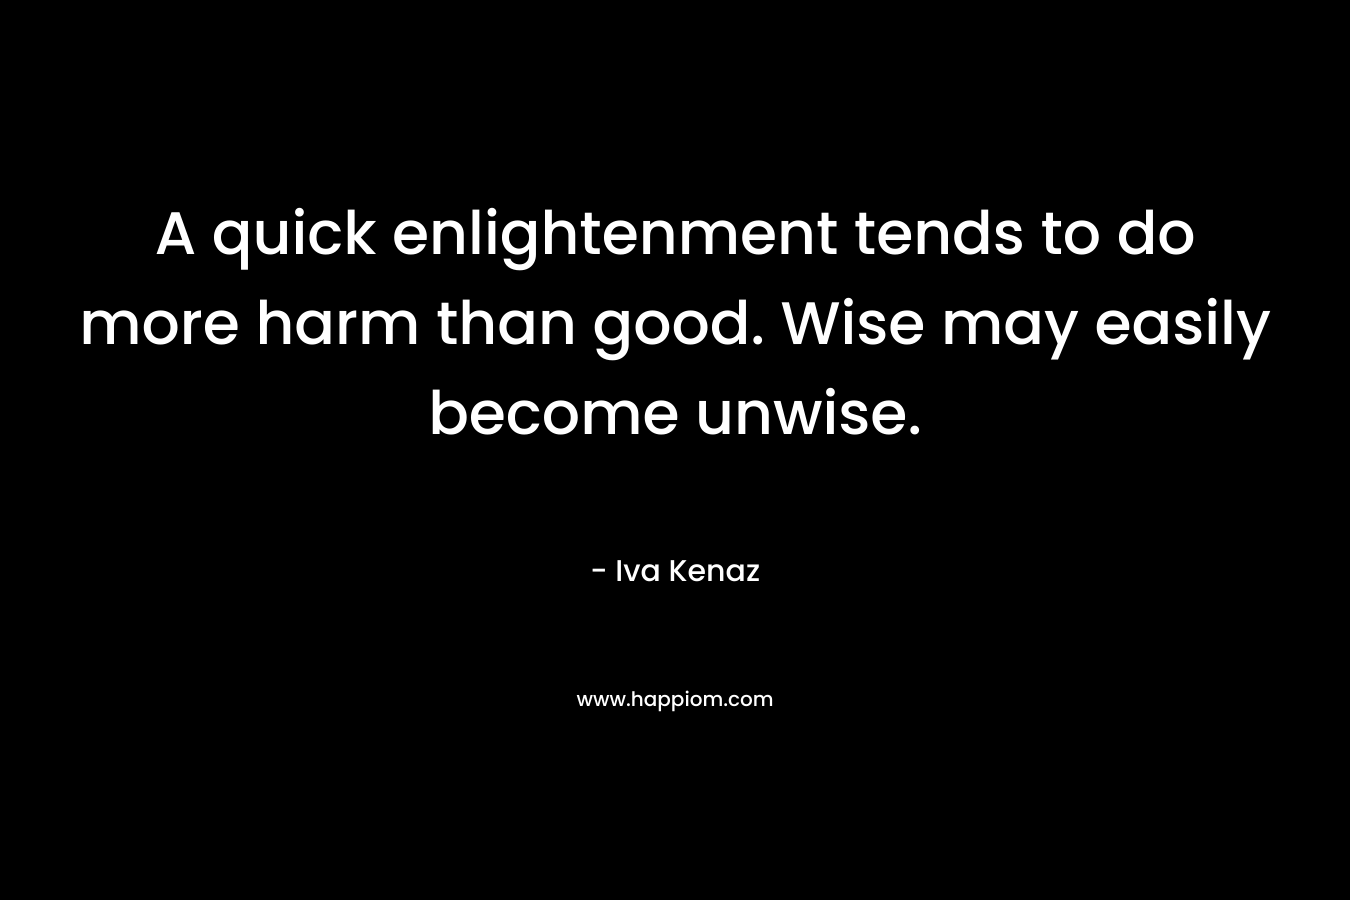 A quick enlightenment tends to do more harm than good. Wise may easily become unwise.